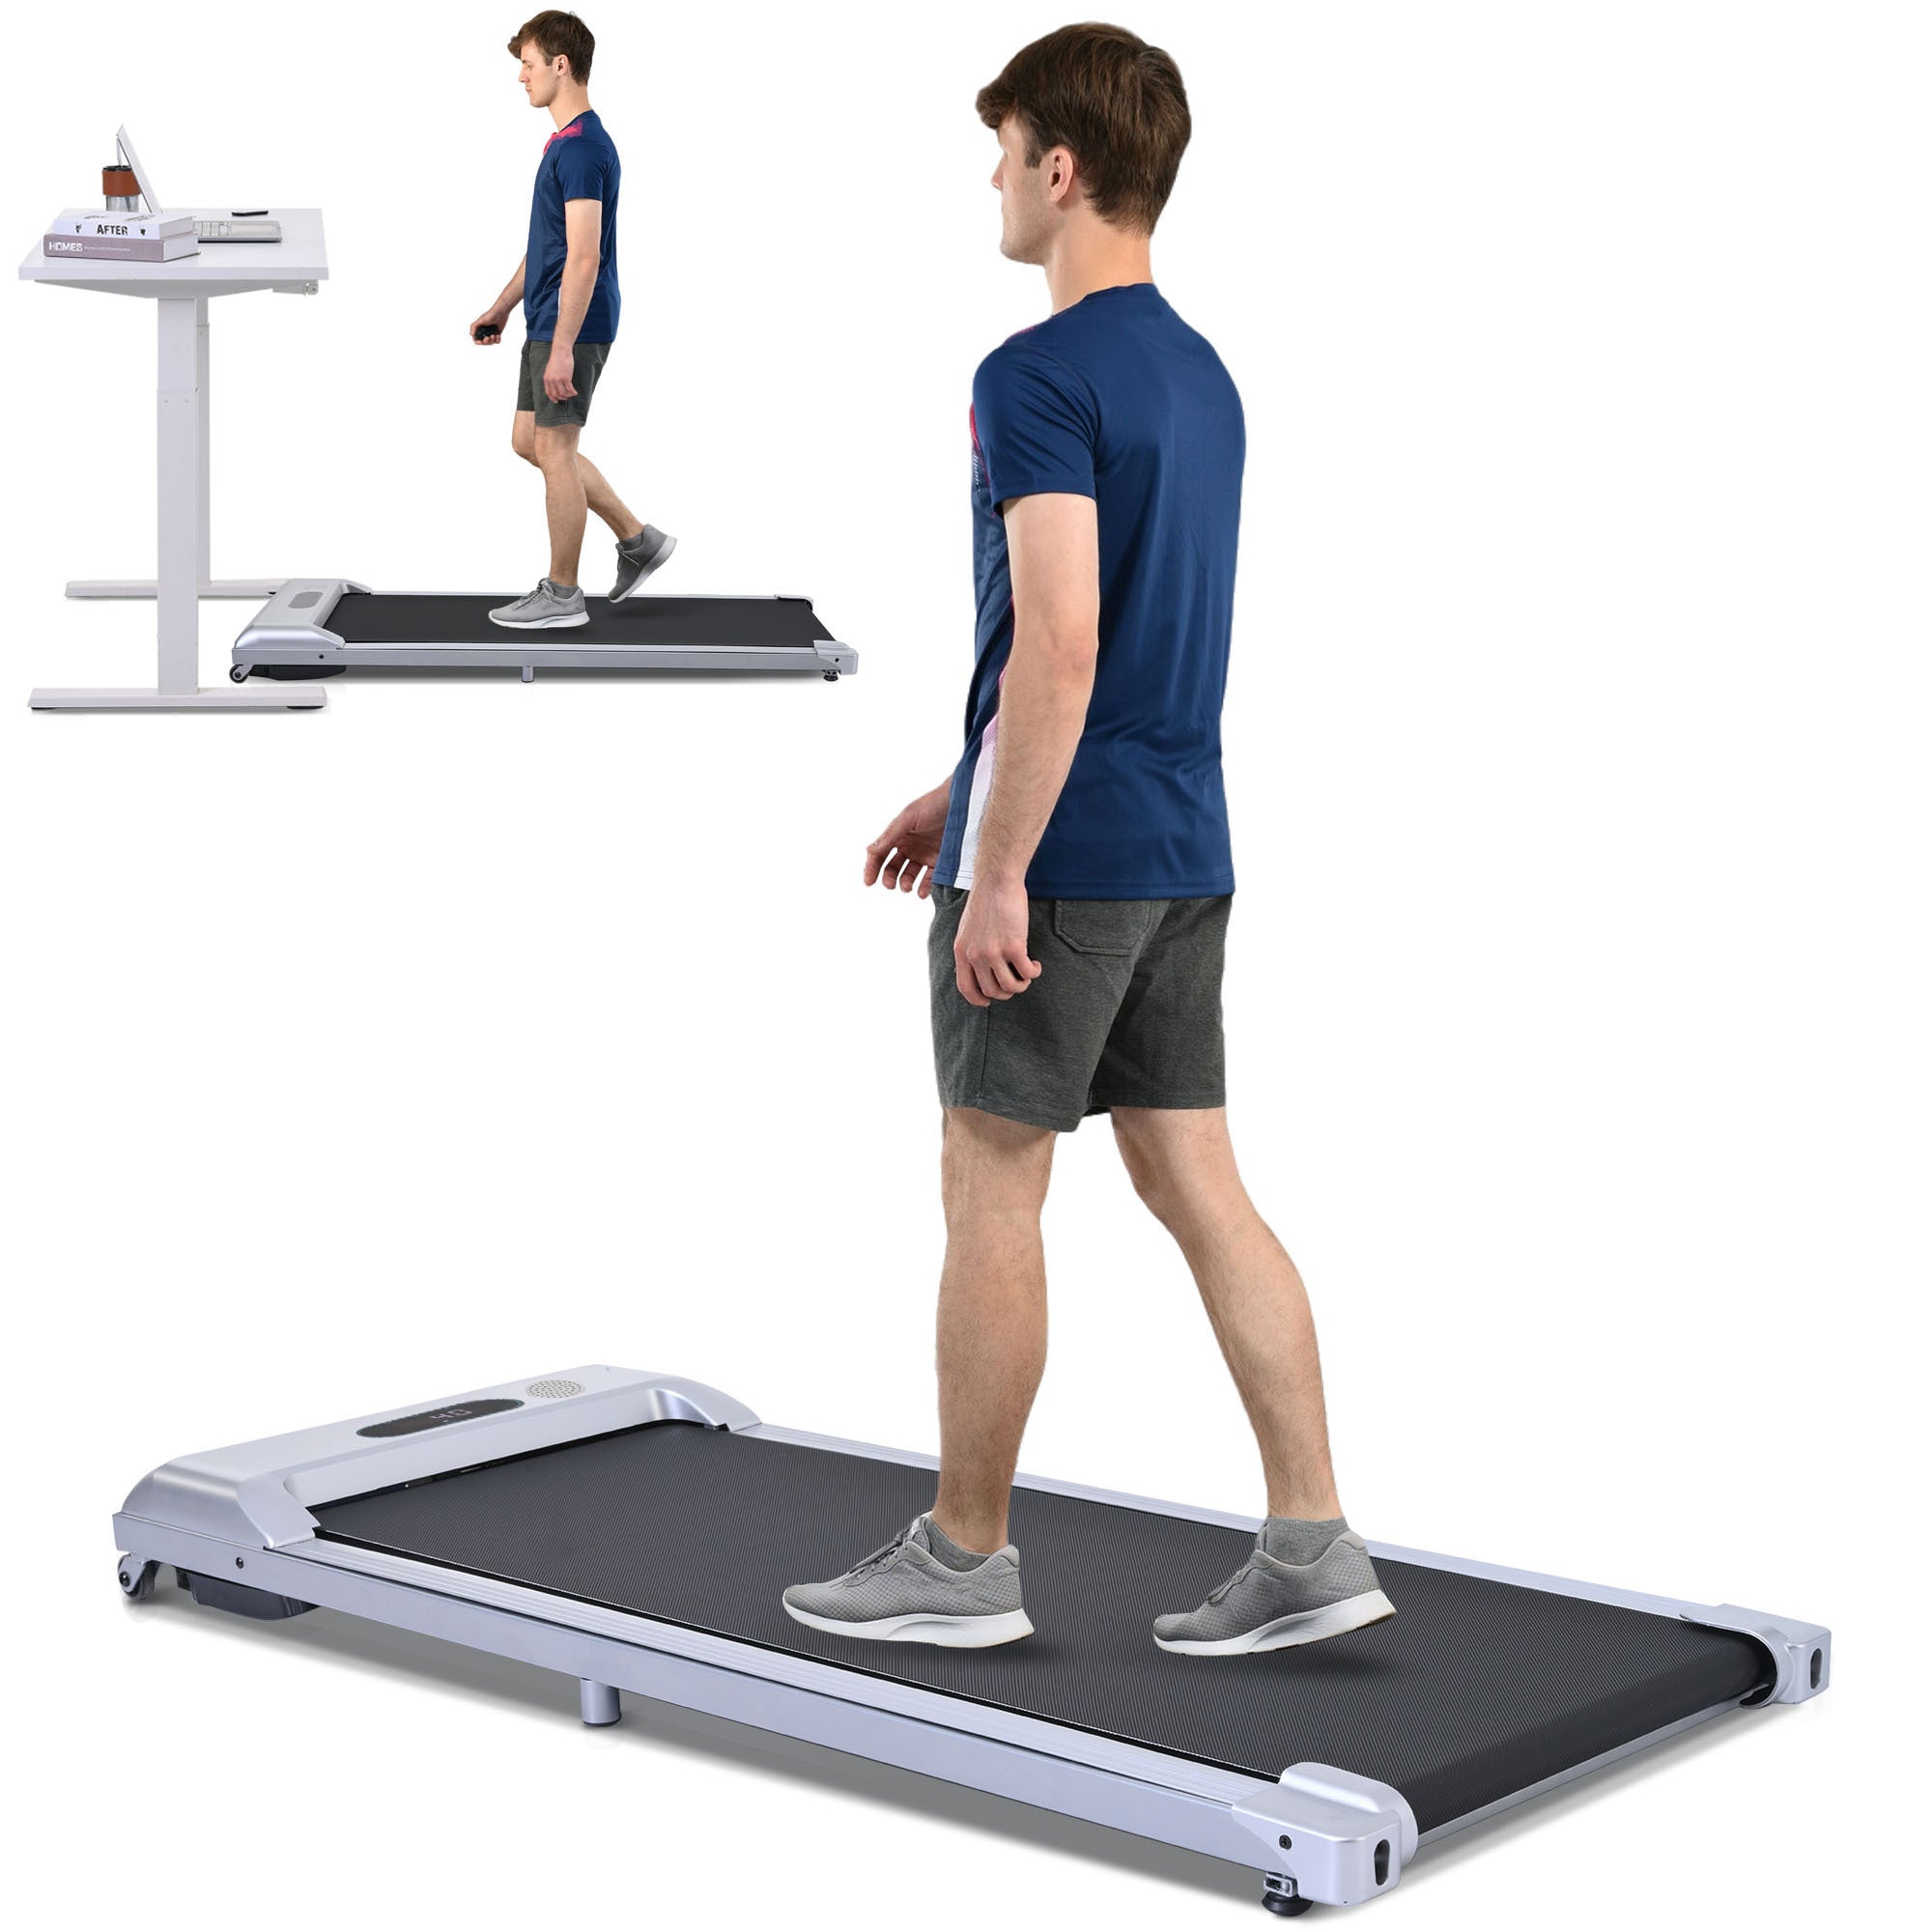 2 in 1 Under Desk Electric Treadmill 2.5HP, Remote Control, Display, Walking Jogging Running Machine Fitness Equipment for Home Gym Office